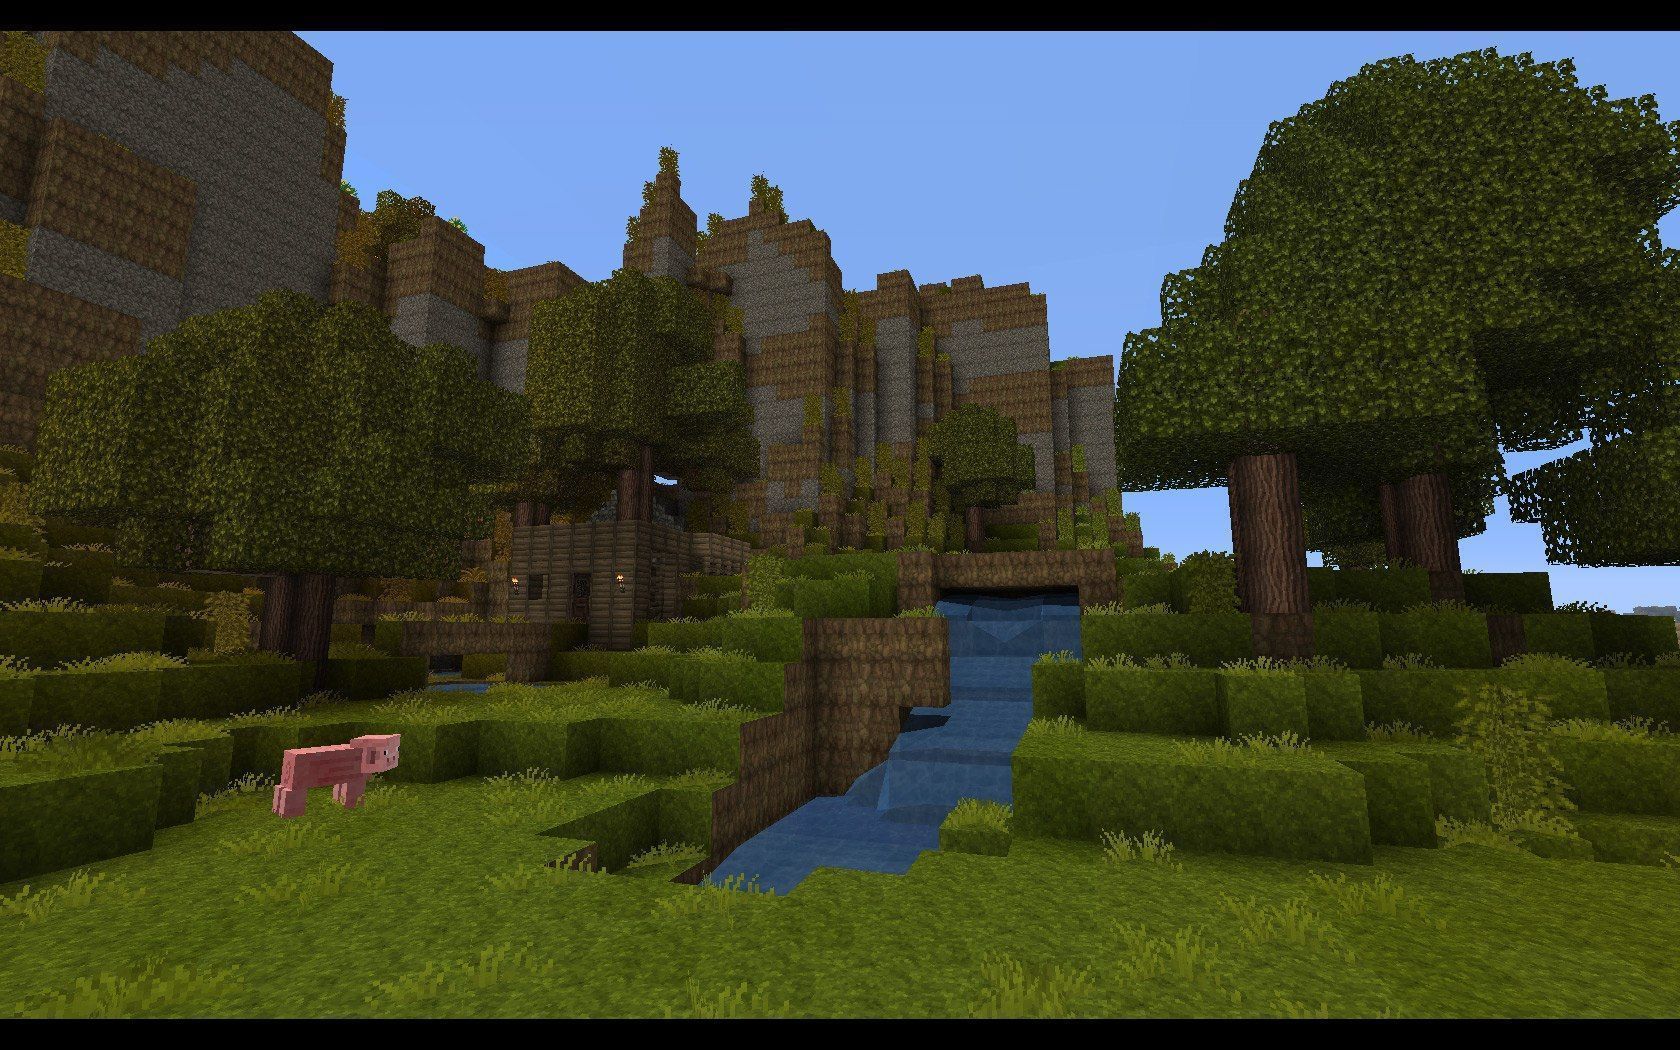 Minecraft wallpaper 1680x1050 - (#28902) - High Quality and ...